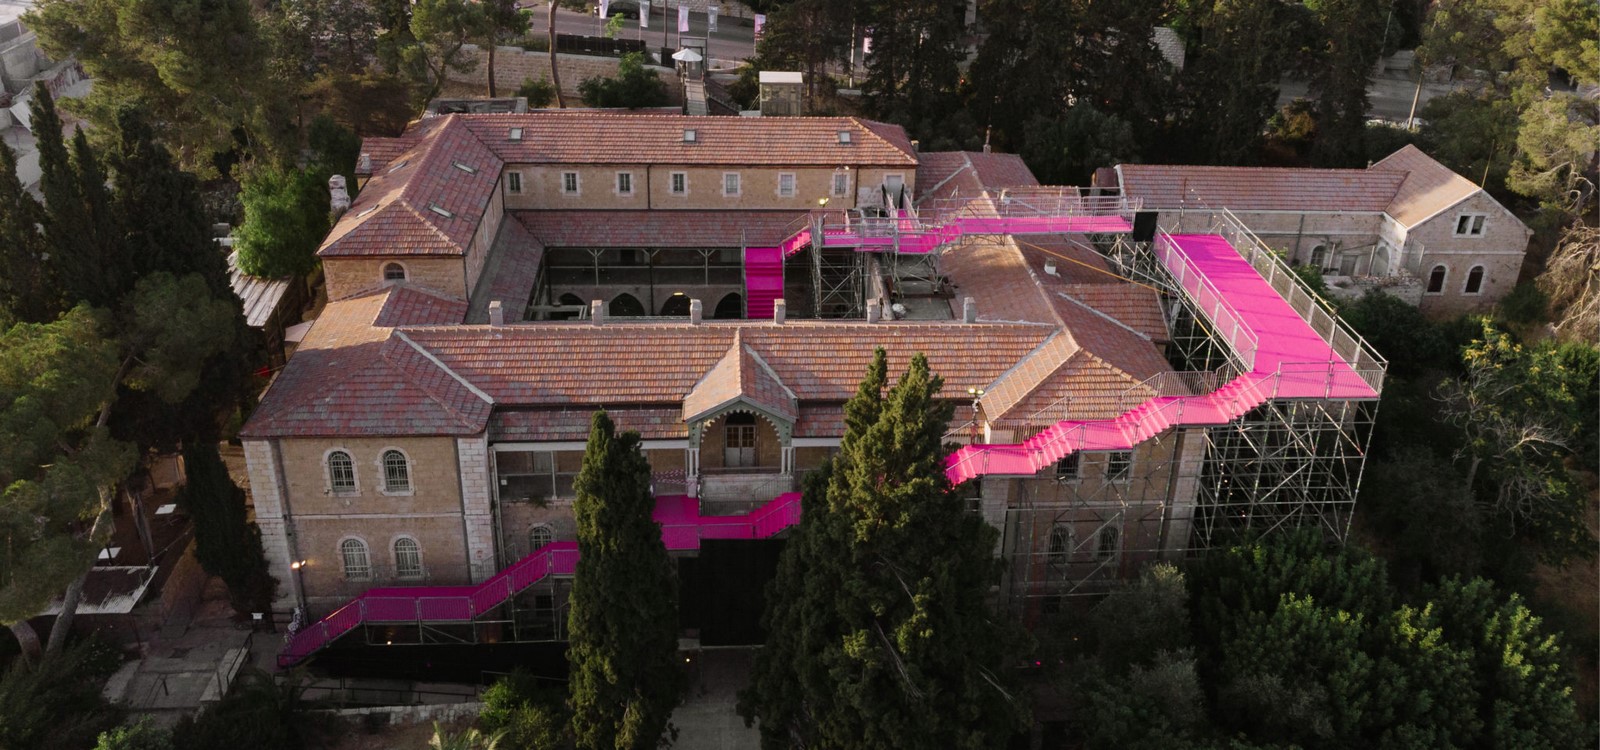 Archisearch 90 DEGREES installation by HQ Architects for Jerusalem Design Week 2019 shifts buiding's orientation